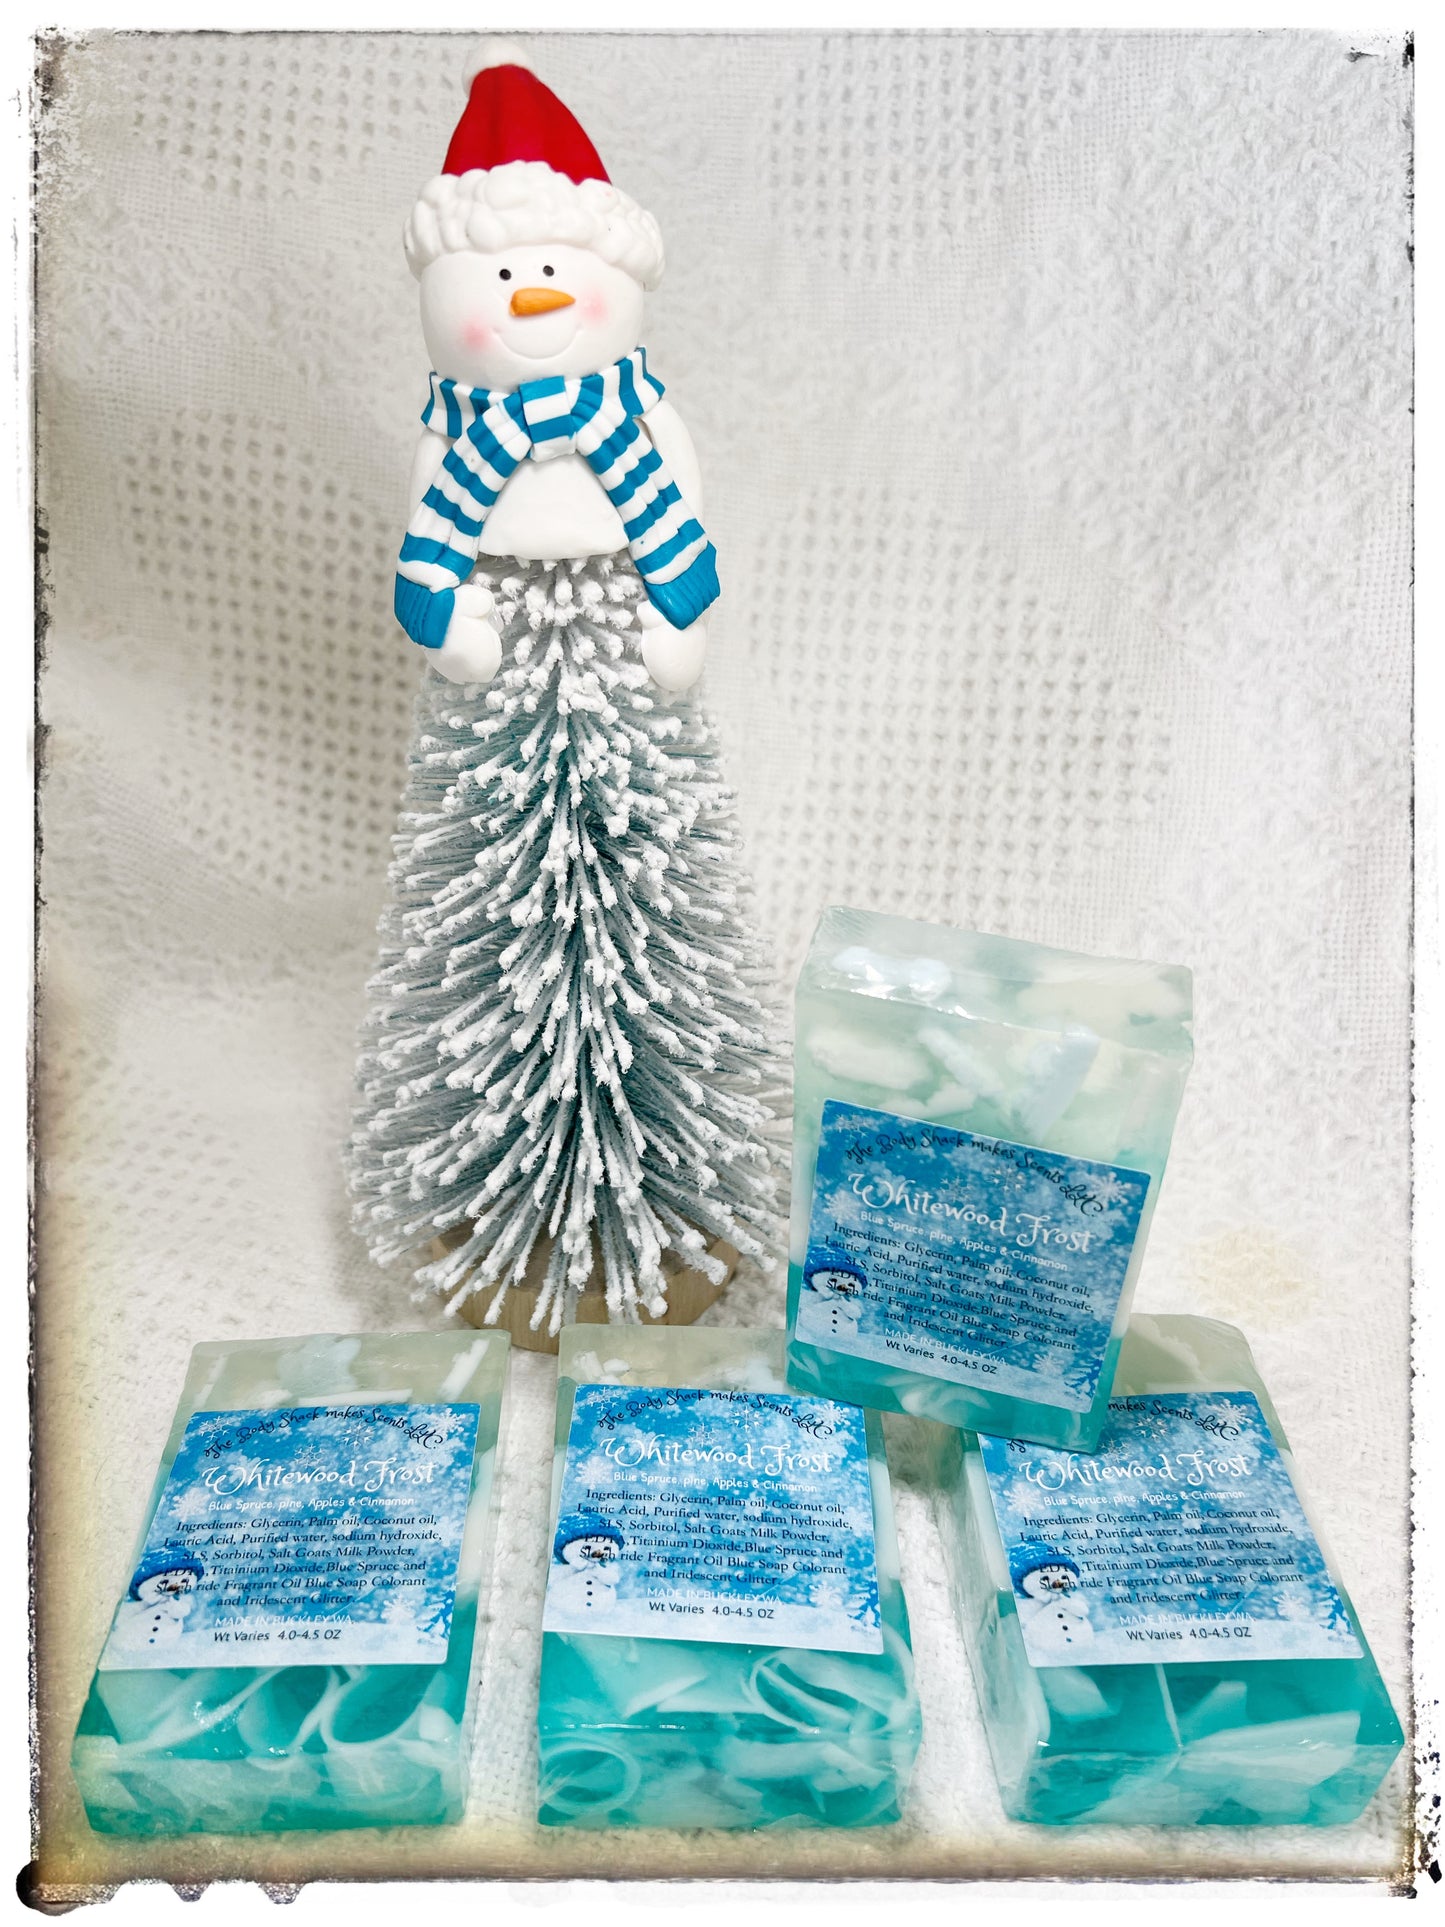 Whitewood Frost Soap